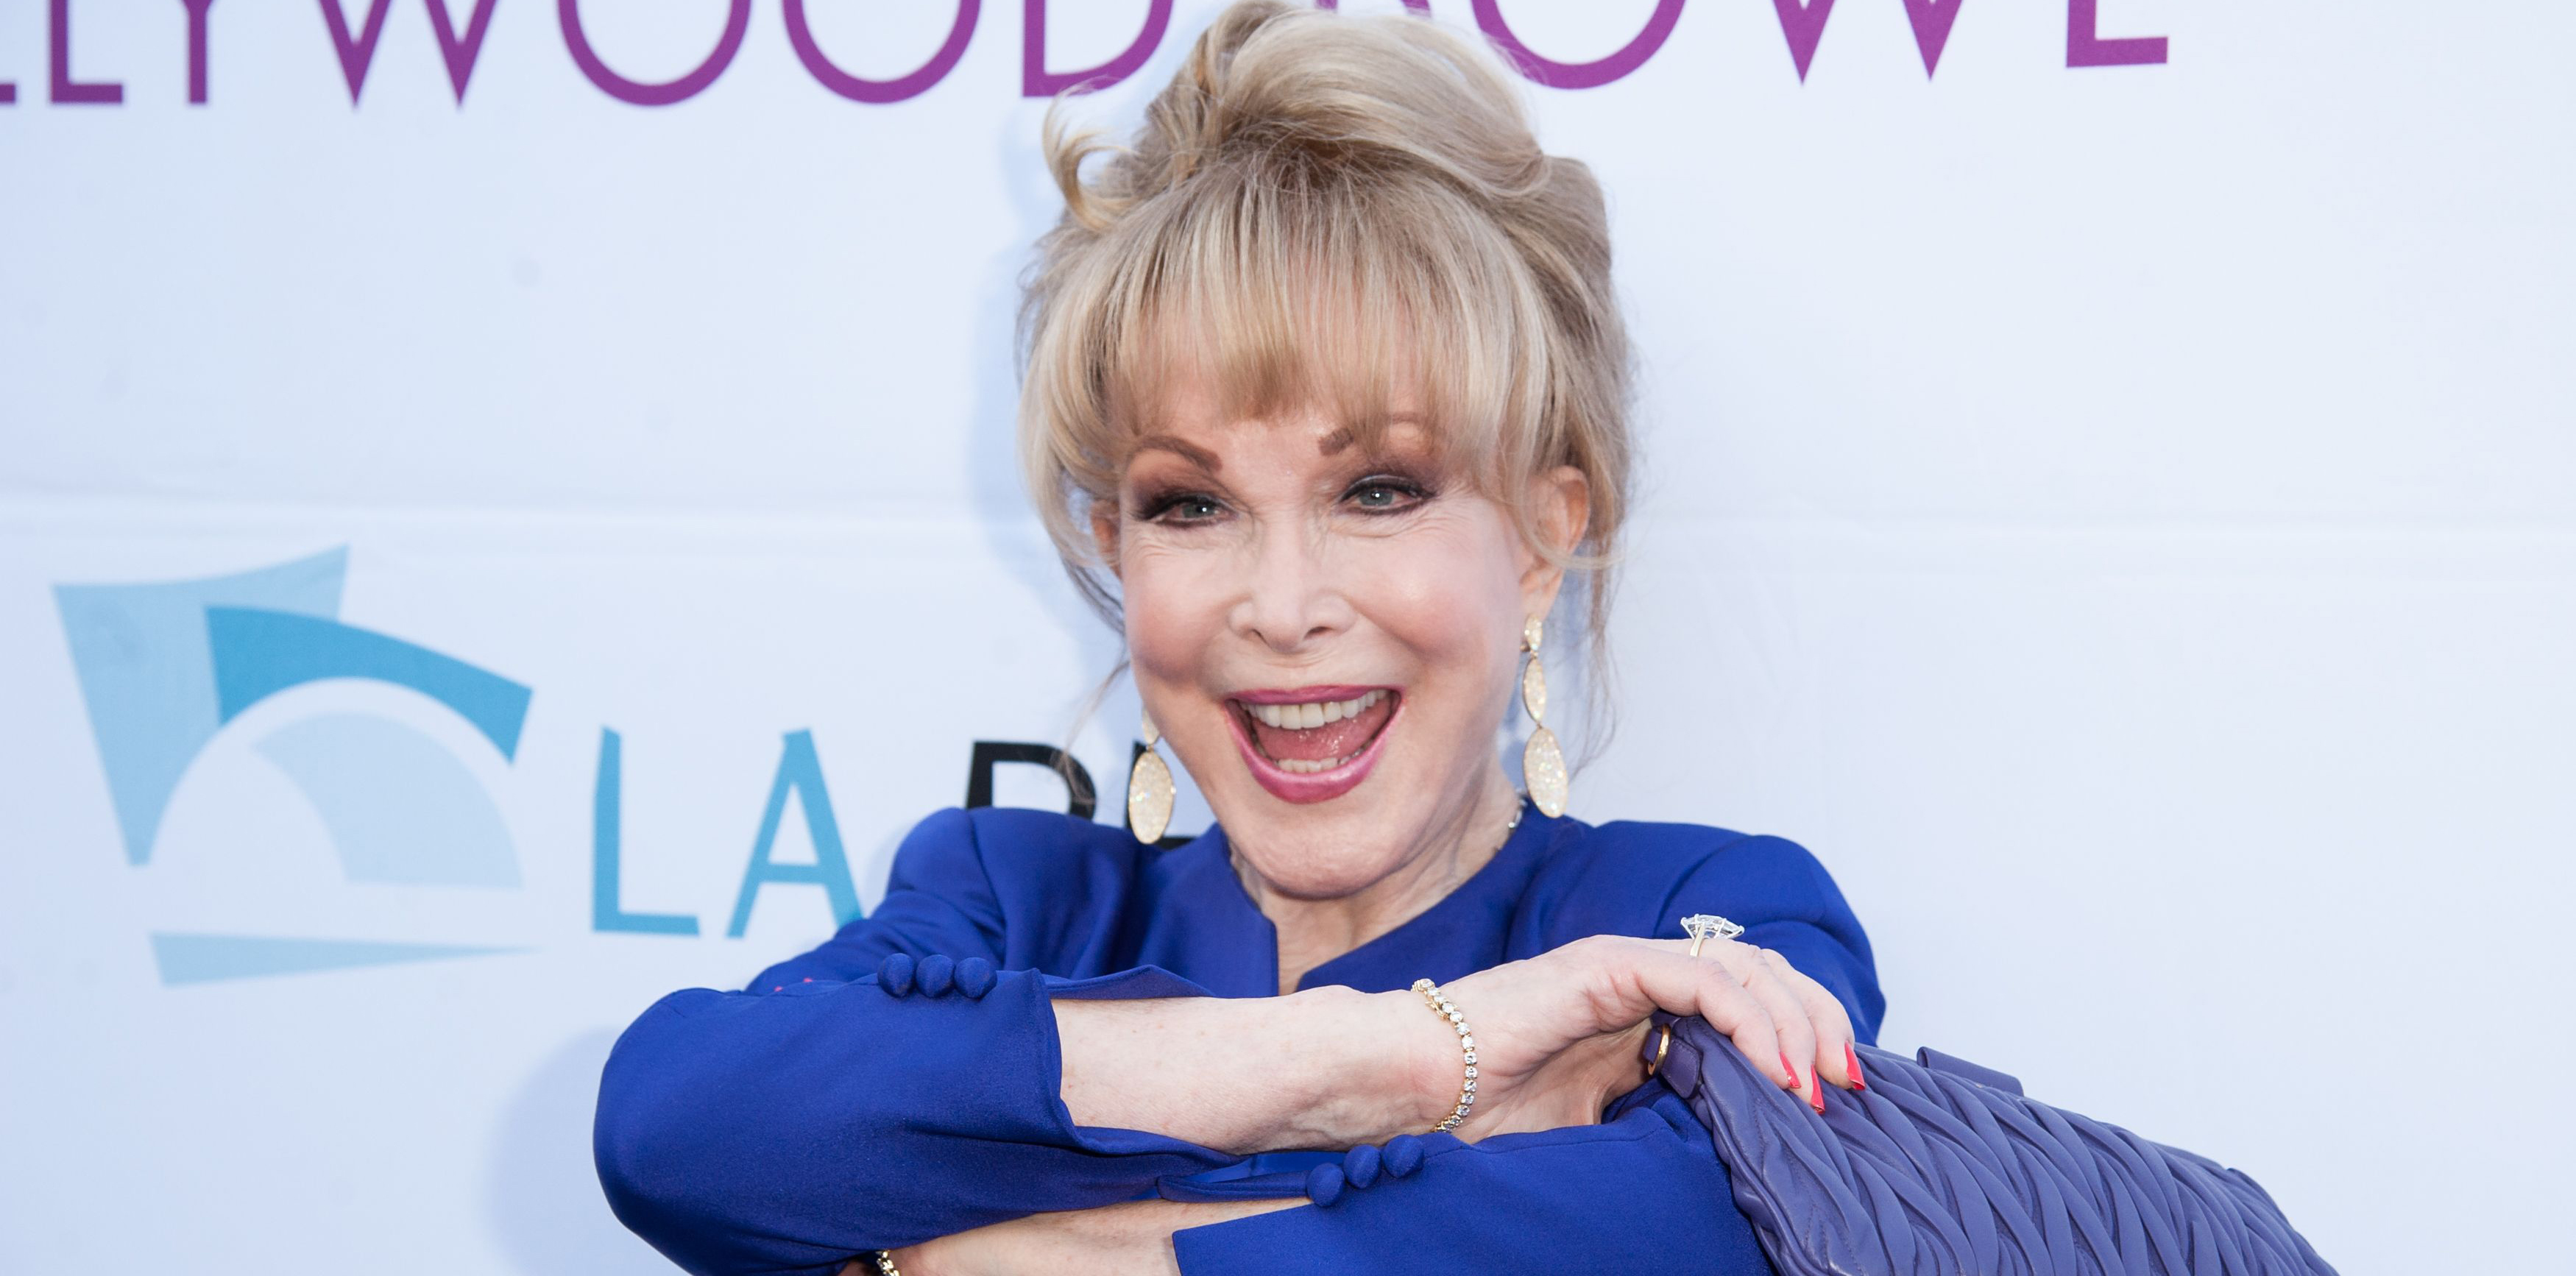 Amateur Nudist Resort Couples - I Dream of Jeannie' Star Barbara Eden: A Look Back at Her Life